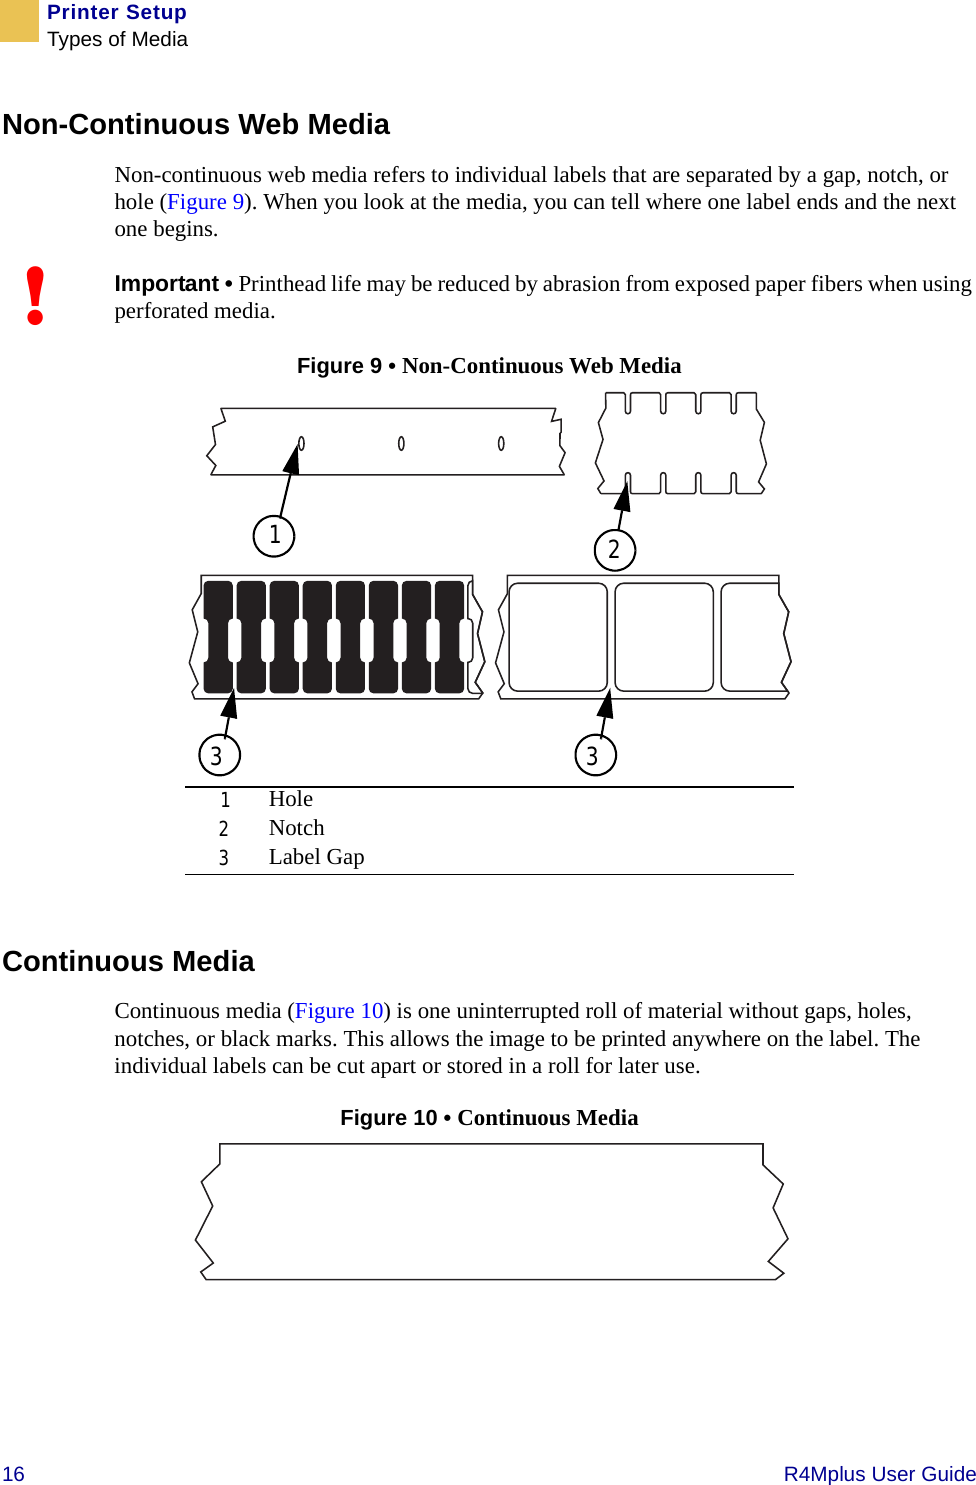 16   R4Mplus User GuidePrinter SetupTypes of MediaNon-Continuous Web MediaNon-continuous web media refers to individual labels that are separated by a gap, notch, or hole (Figure 9). When you look at the media, you can tell where one label ends and the next one begins.Figure 9 • Non-Continuous Web MediaContinuous MediaContinuous media (Figure 10) is one uninterrupted roll of material without gaps, holes, notches, or black marks. This allows the image to be printed anywhere on the label. The individual labels can be cut apart or stored in a roll for later use.Figure 10 • Continuous Media !Important • Printhead life may be reduced by abrasion from exposed paper fibers when using perforated media.1Hole2Notch3Label Gap13 32